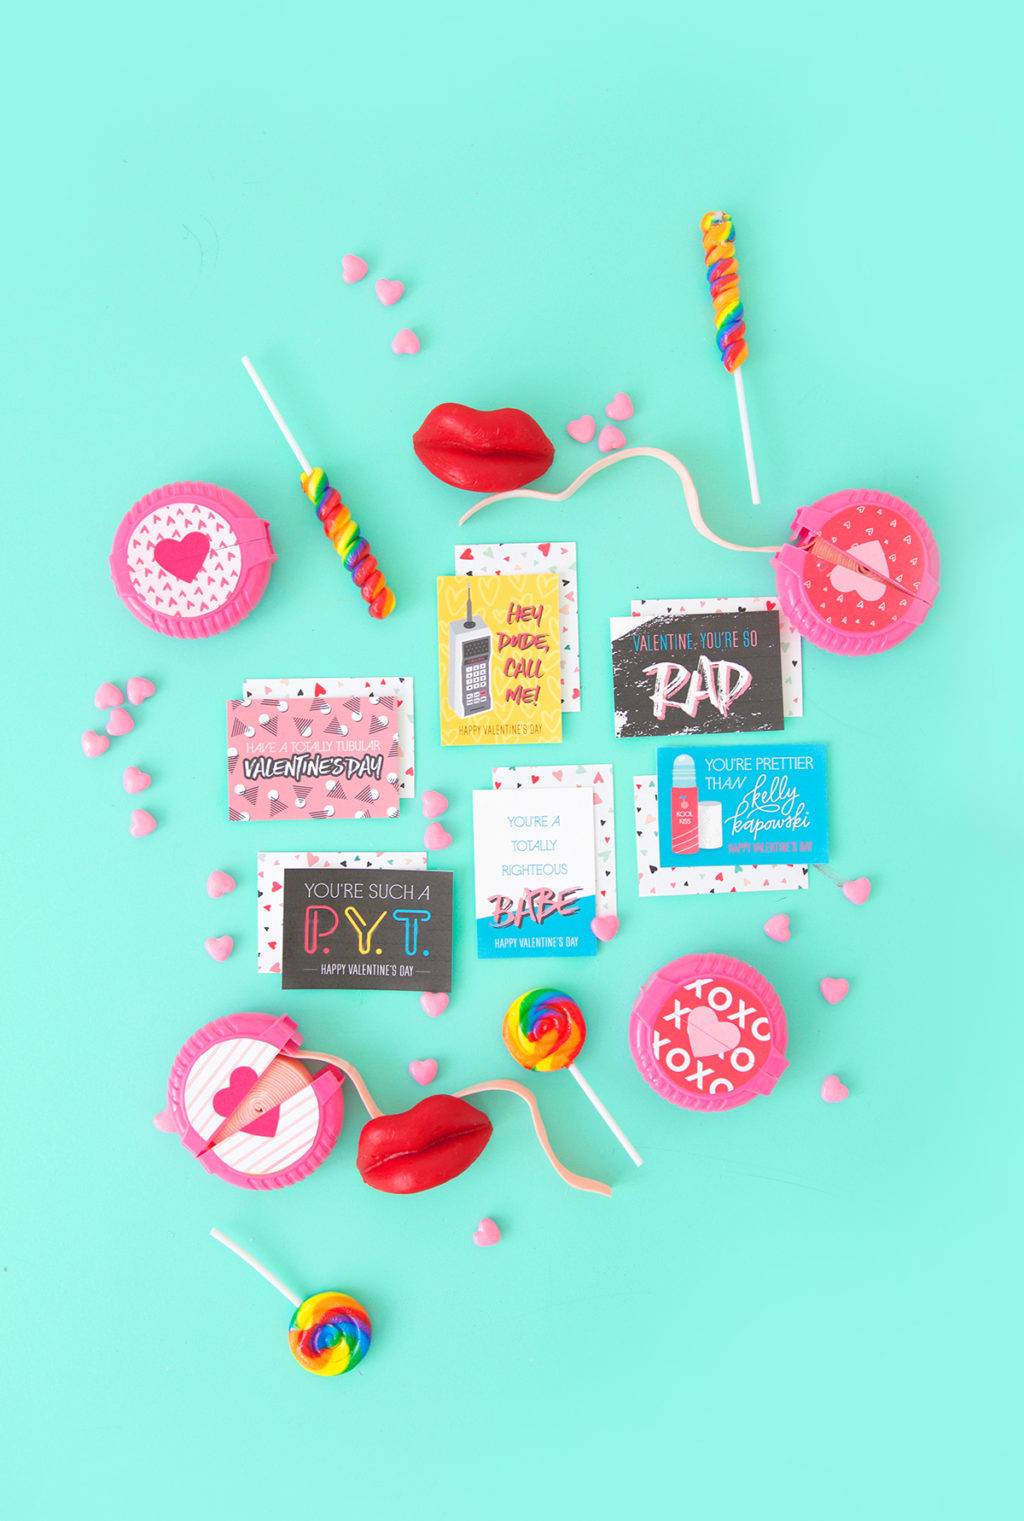 Valentine's day cards and candies."